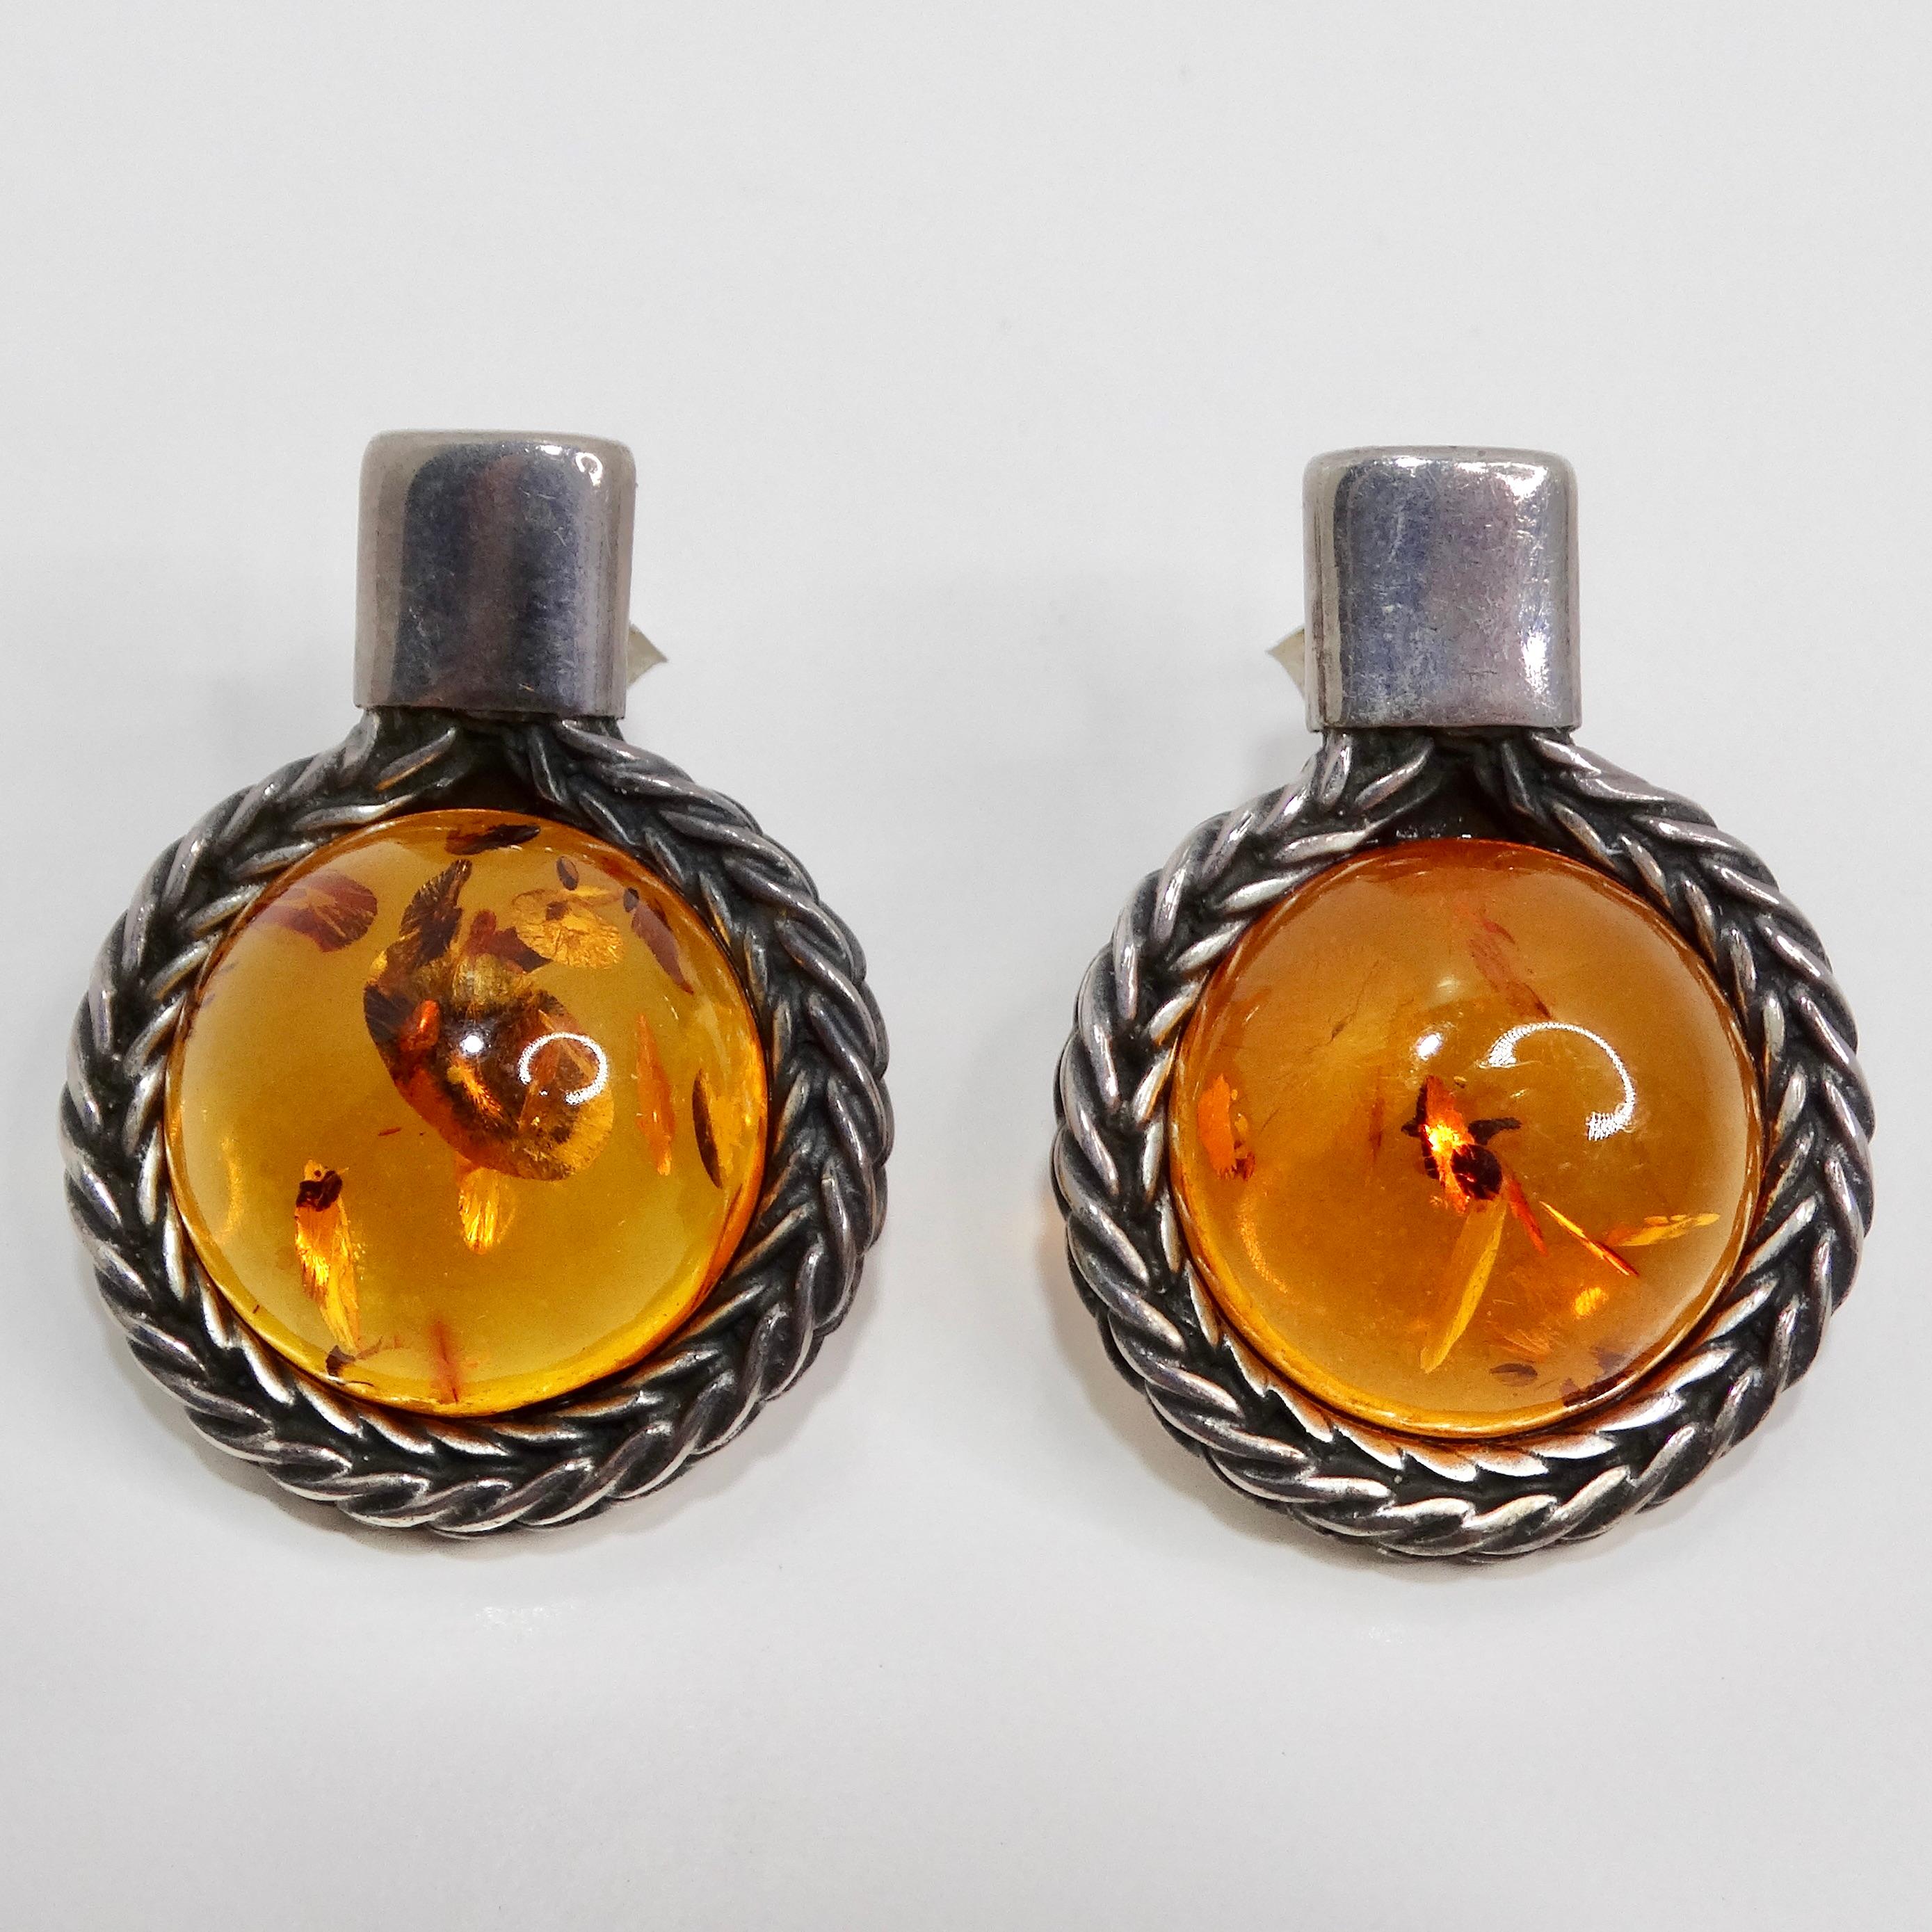 Introducing the 1960s Silver Amber Earrings, a beautiful vintage pair that captures the timeless elegance and vibrant allure of amber. These stunning earrings feature round amber stones, each showcasing a unique pattern and rich golden hue. The